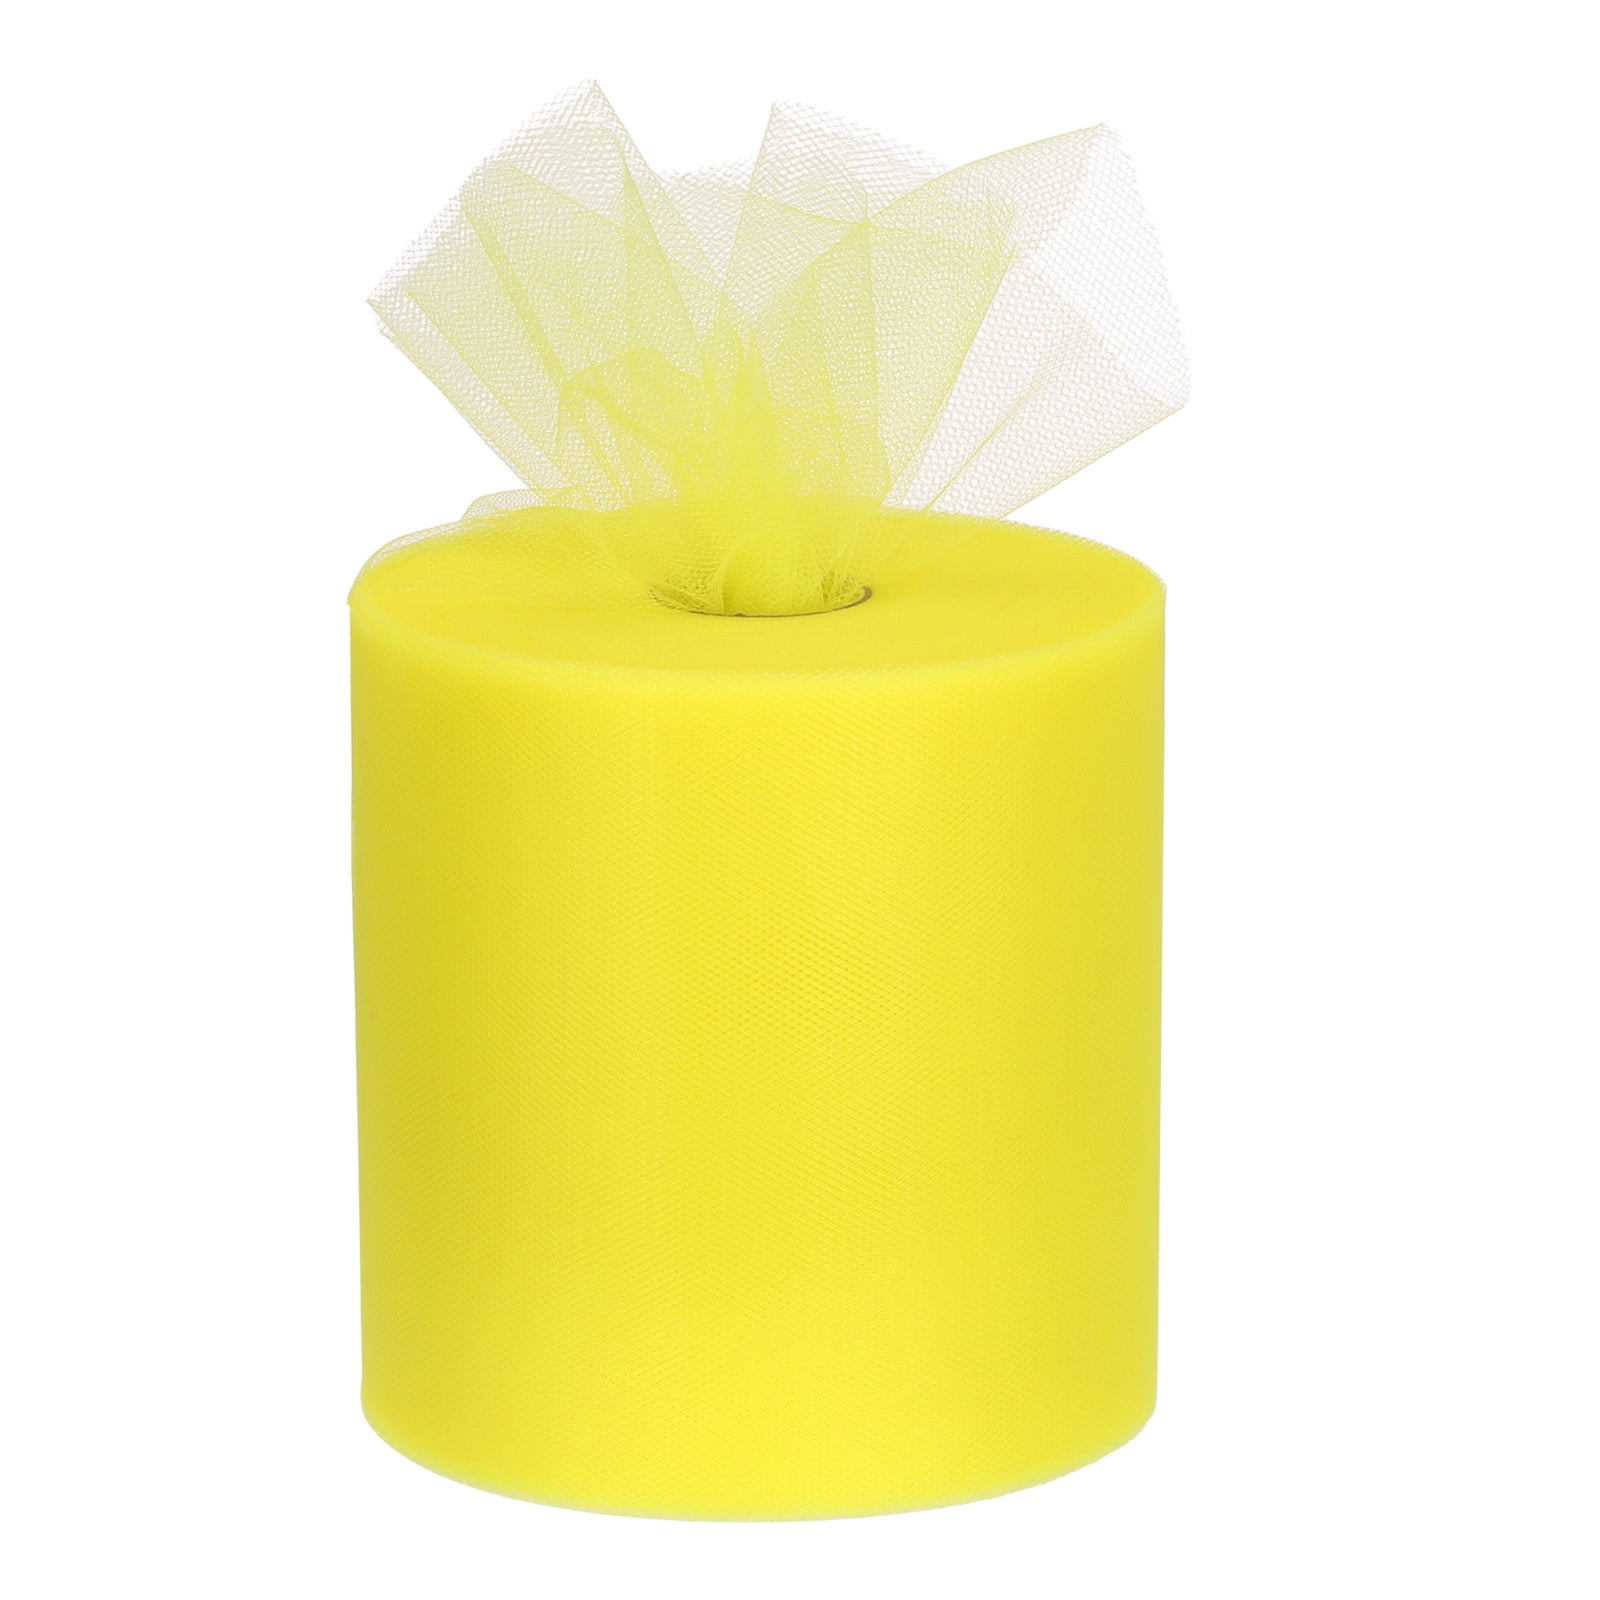 Uxcell Tulle Rolls Fabric Spools 6 100 Yards Lime Green for Decoration  Wrapping Wedding DIY Crafts 